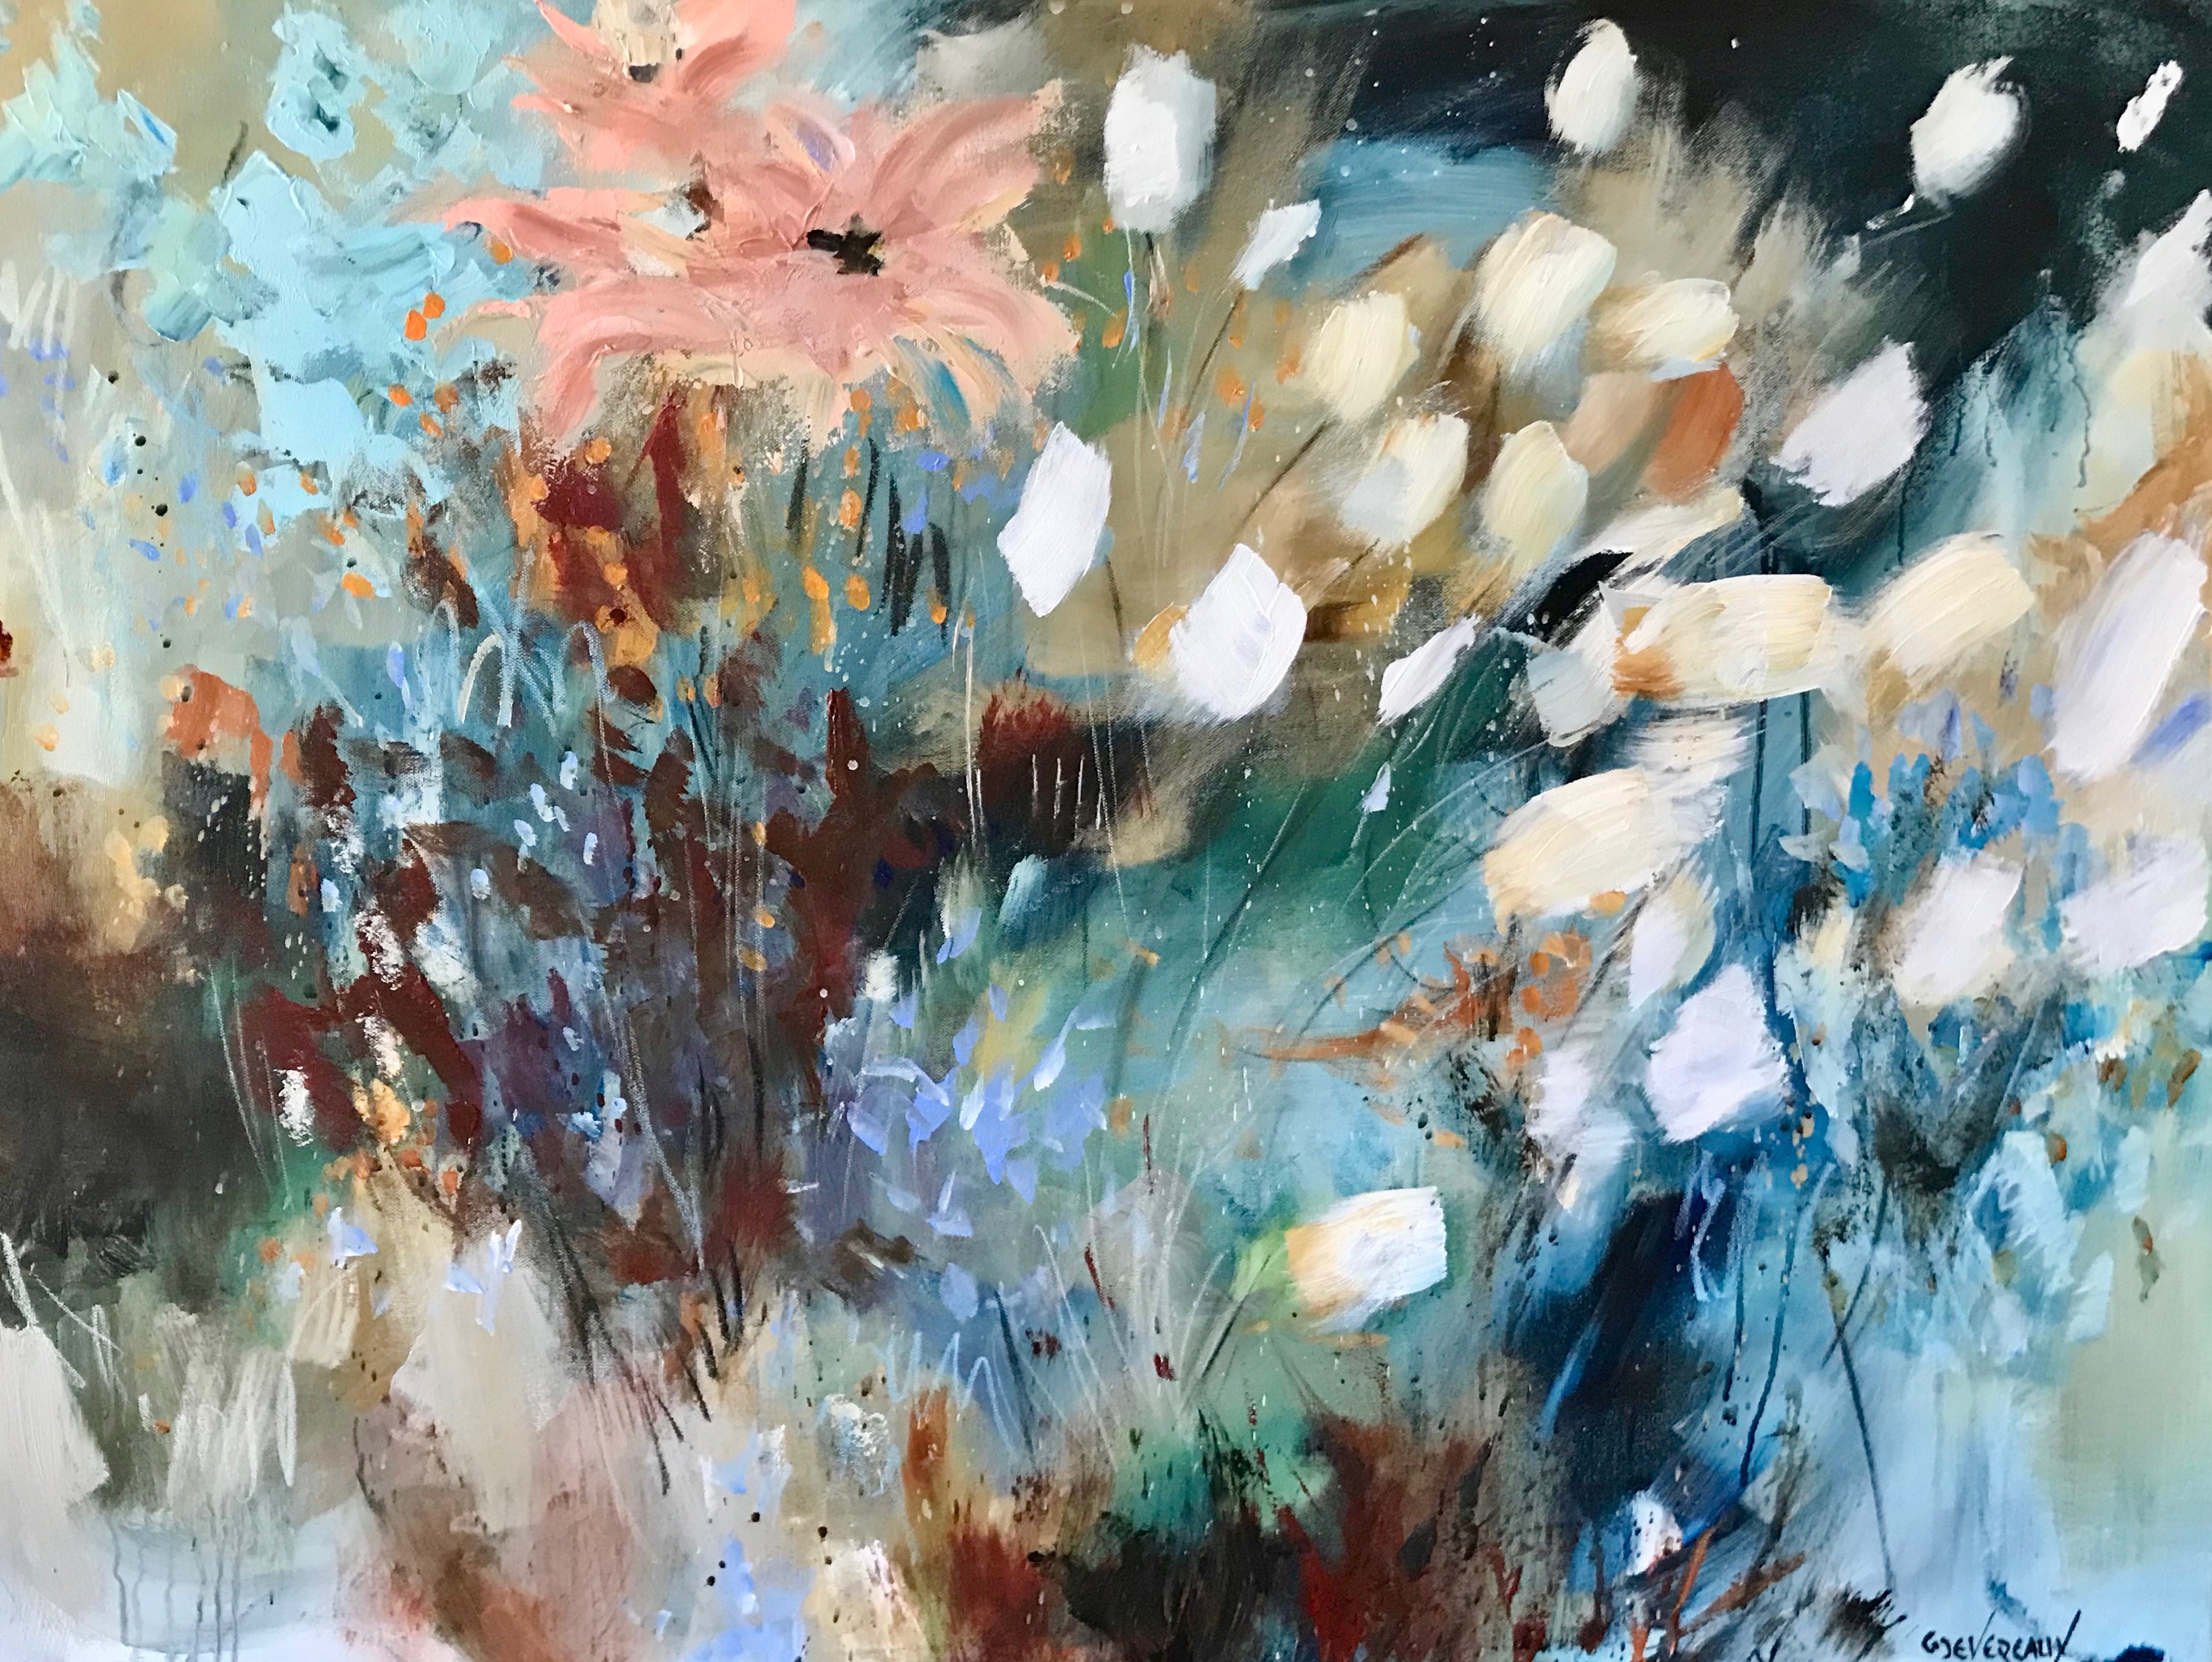 'Say It Out Loud' 30x40 in  contemporary modern flower, floral painting by Cher Devereaux on stretched canvas.